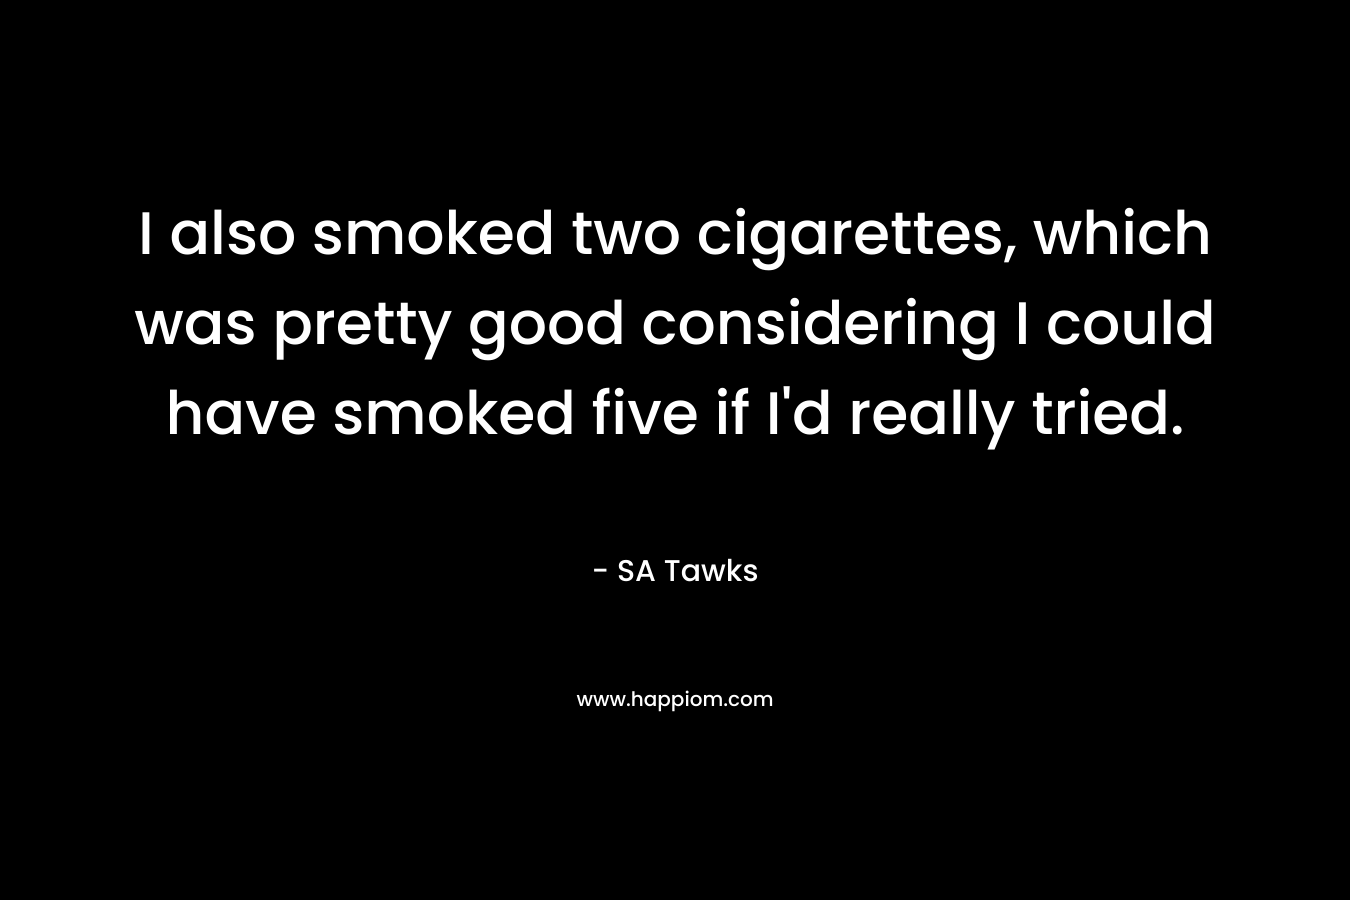 I also smoked two cigarettes, which was pretty good considering I could have smoked five if I’d really tried. – SA Tawks